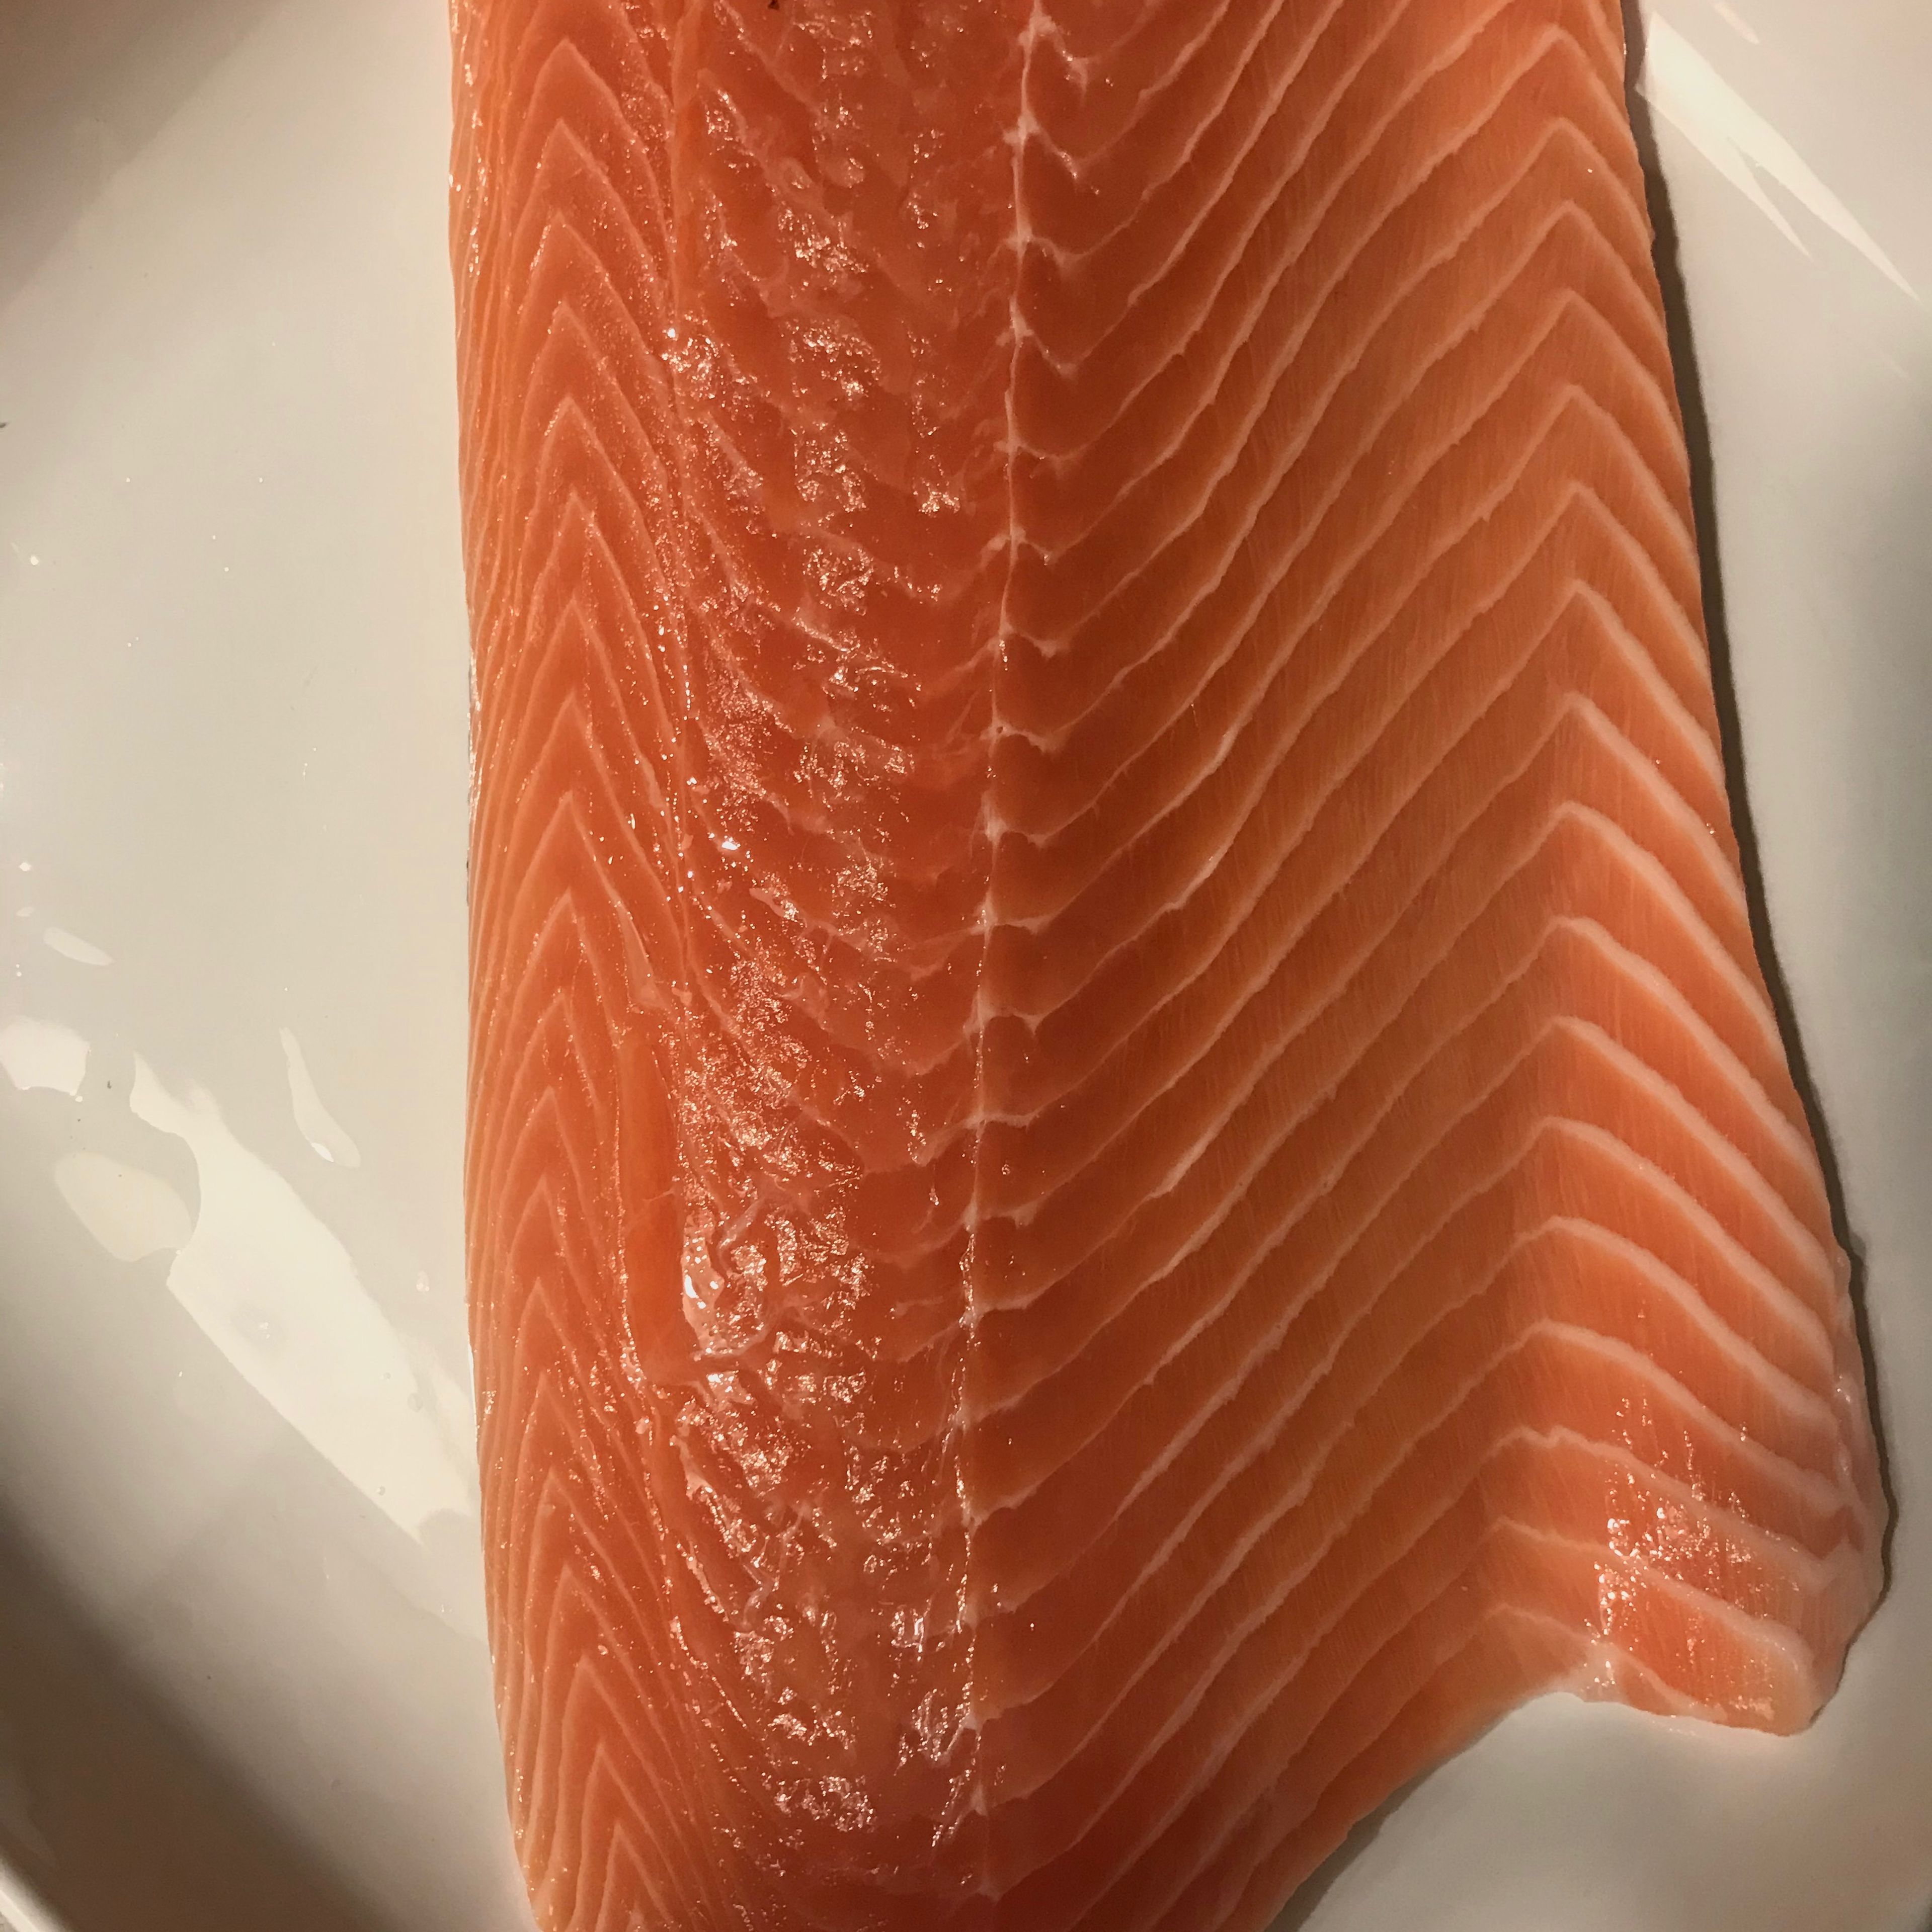 Wash the salmon fillet.